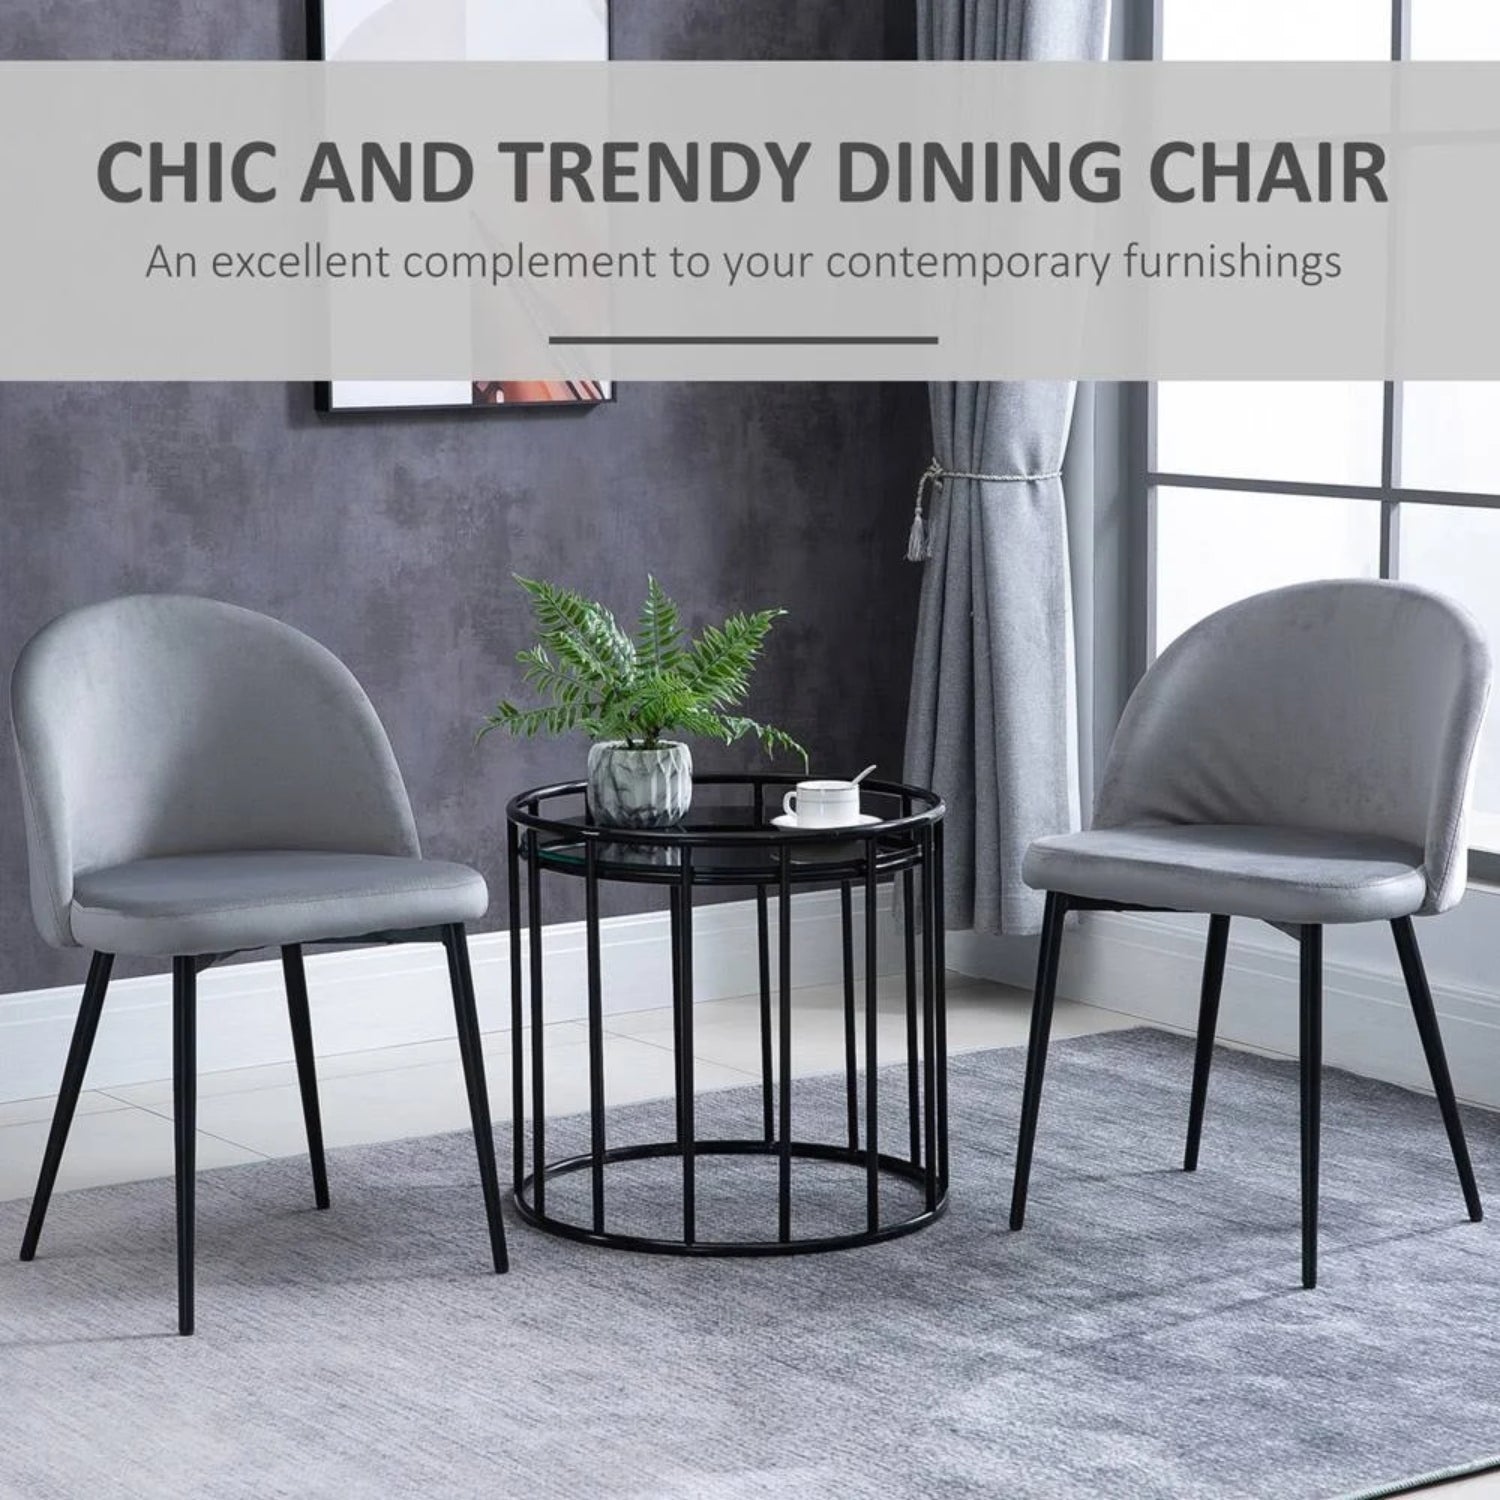 Two modern grey velvet dining chairs placed together with a table in the center.